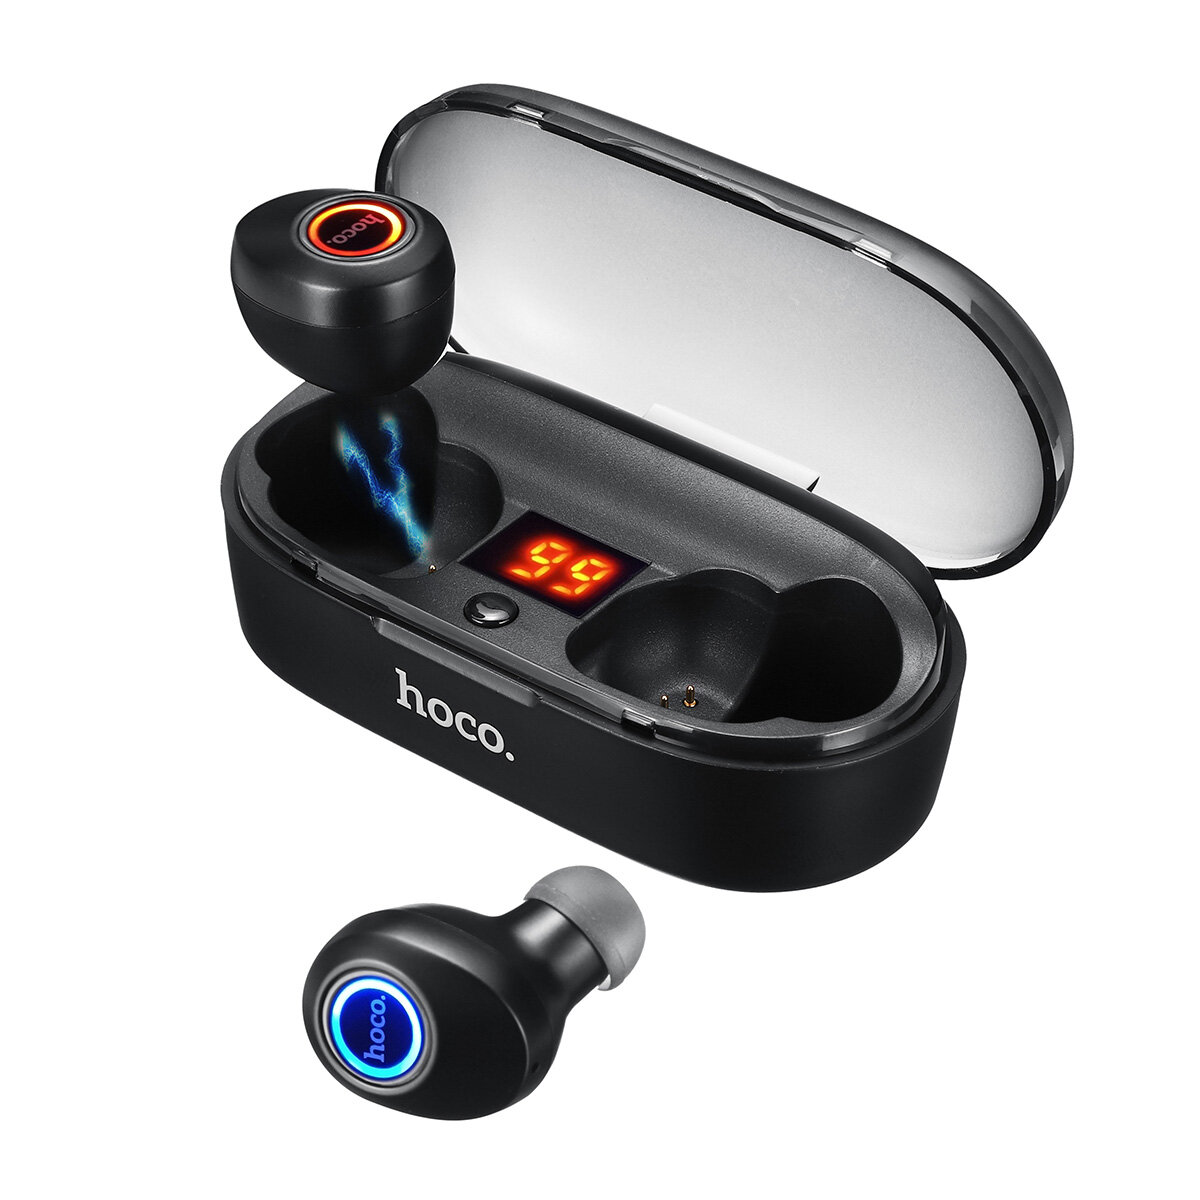 [bluetooth 5.0] HOCO TWS HiFi Wireless Earbuds LED Display Bass Stereo CVC6.0 Noise Cancelling Sport